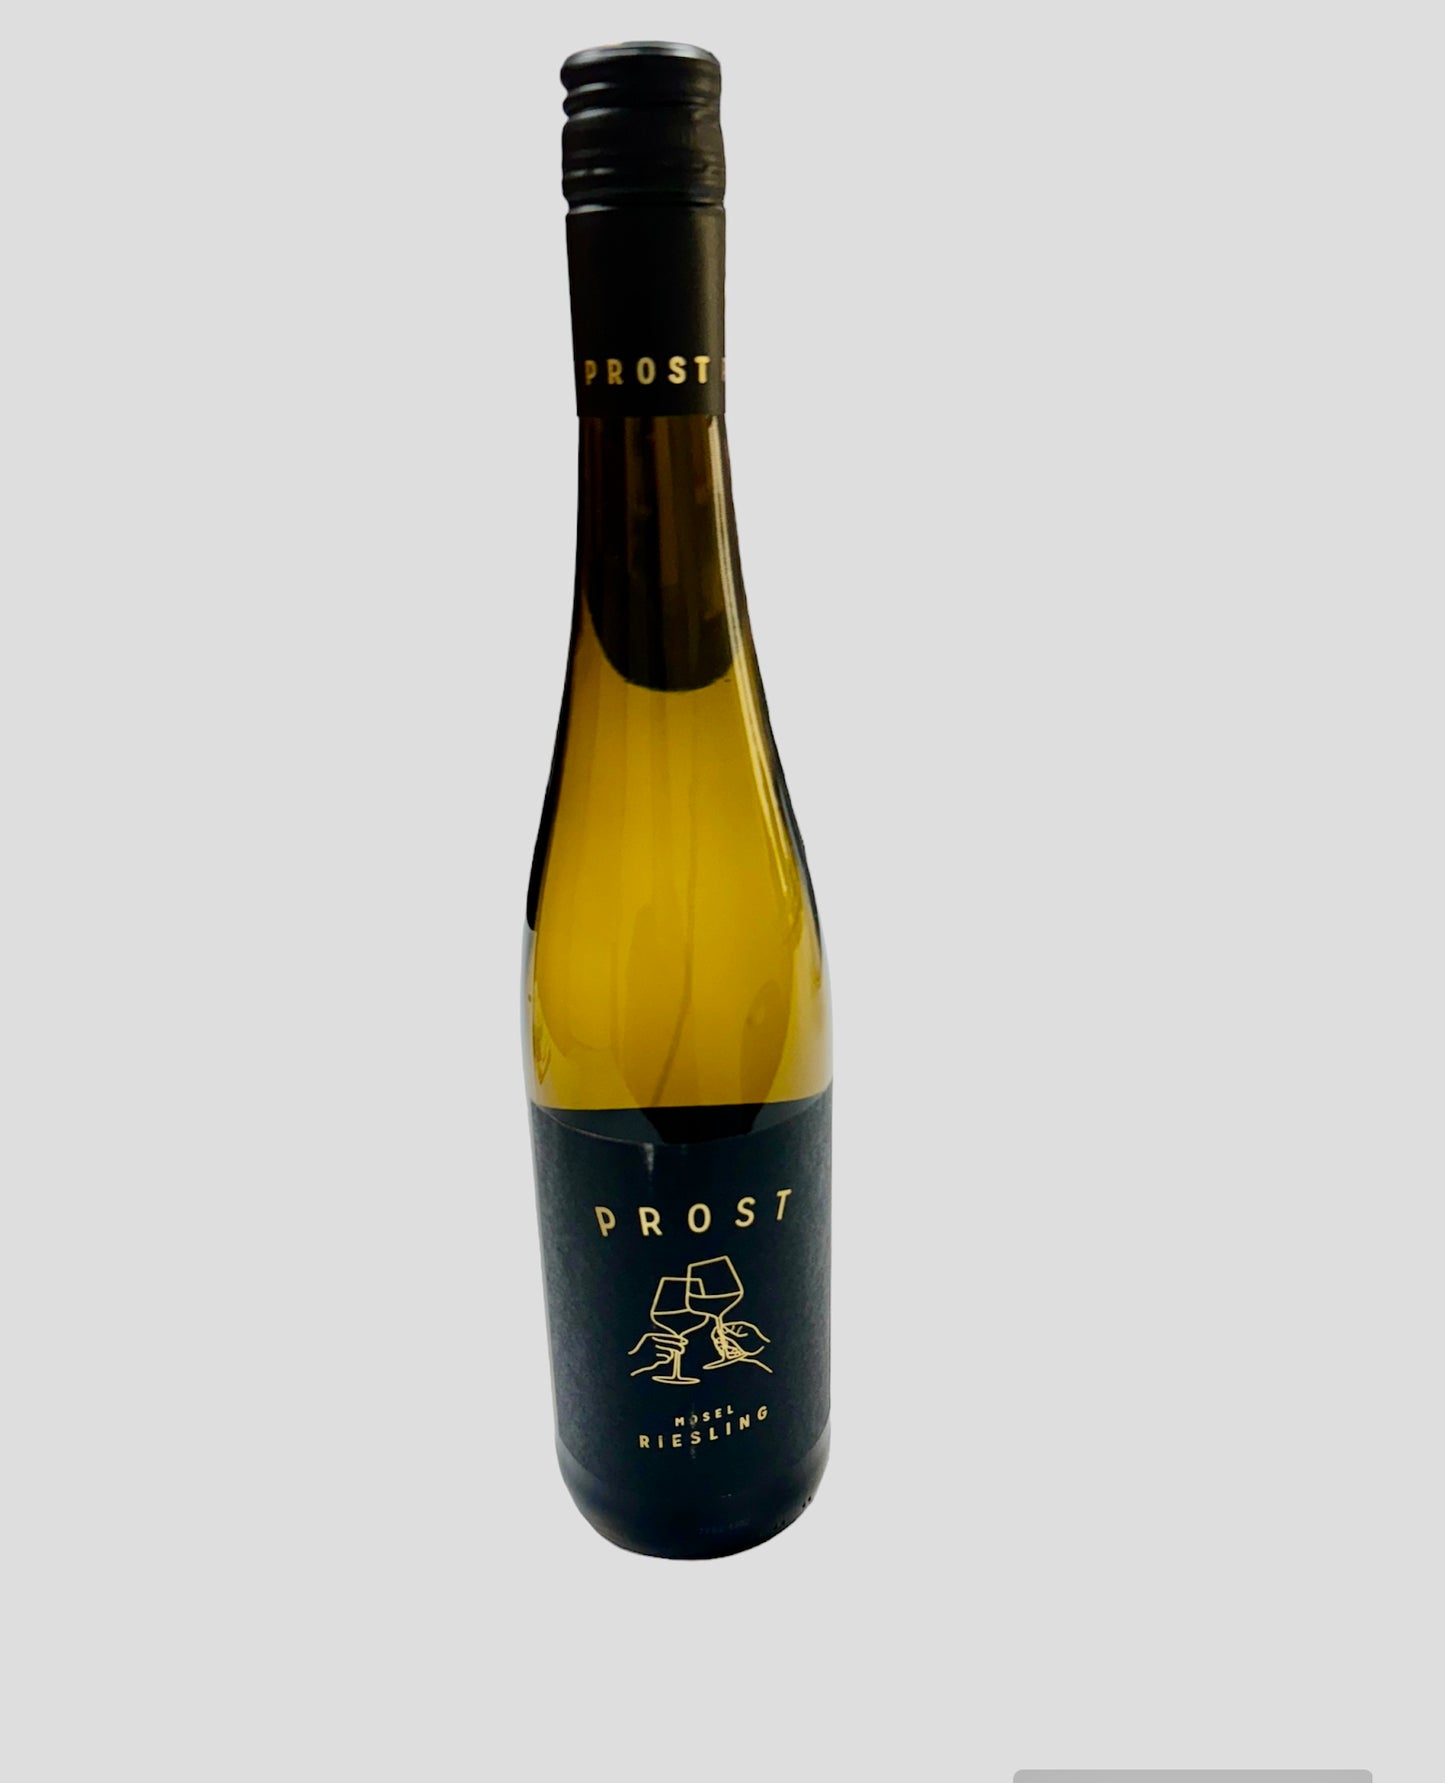 Prost Riesling